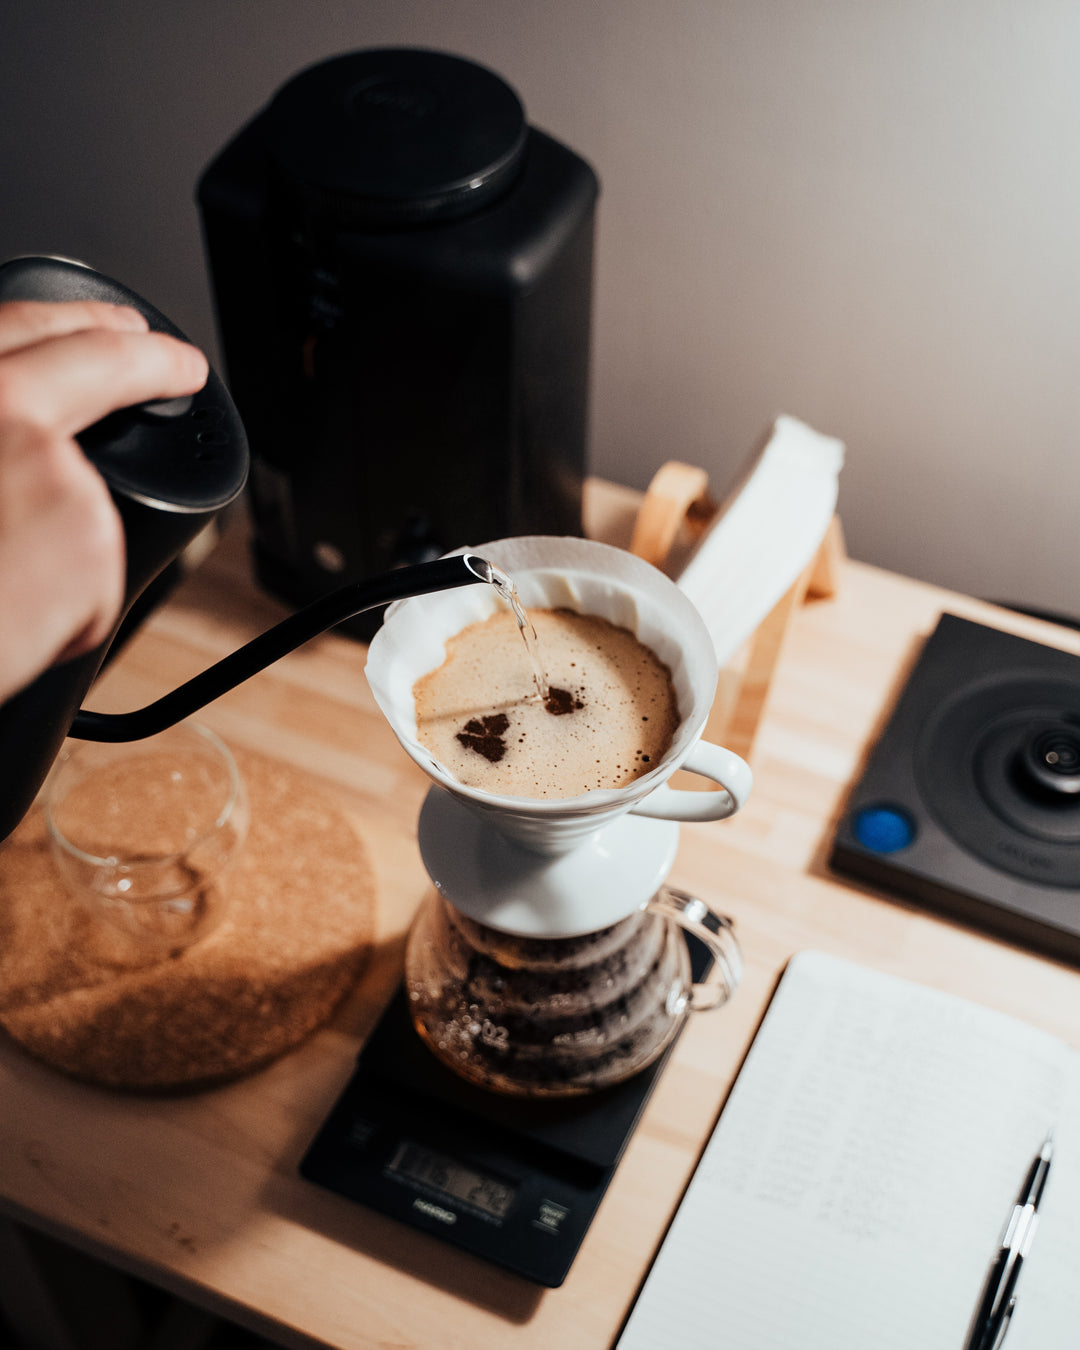 HOW TO MAKE THE PERFECT V60 COFFEE AT HOME